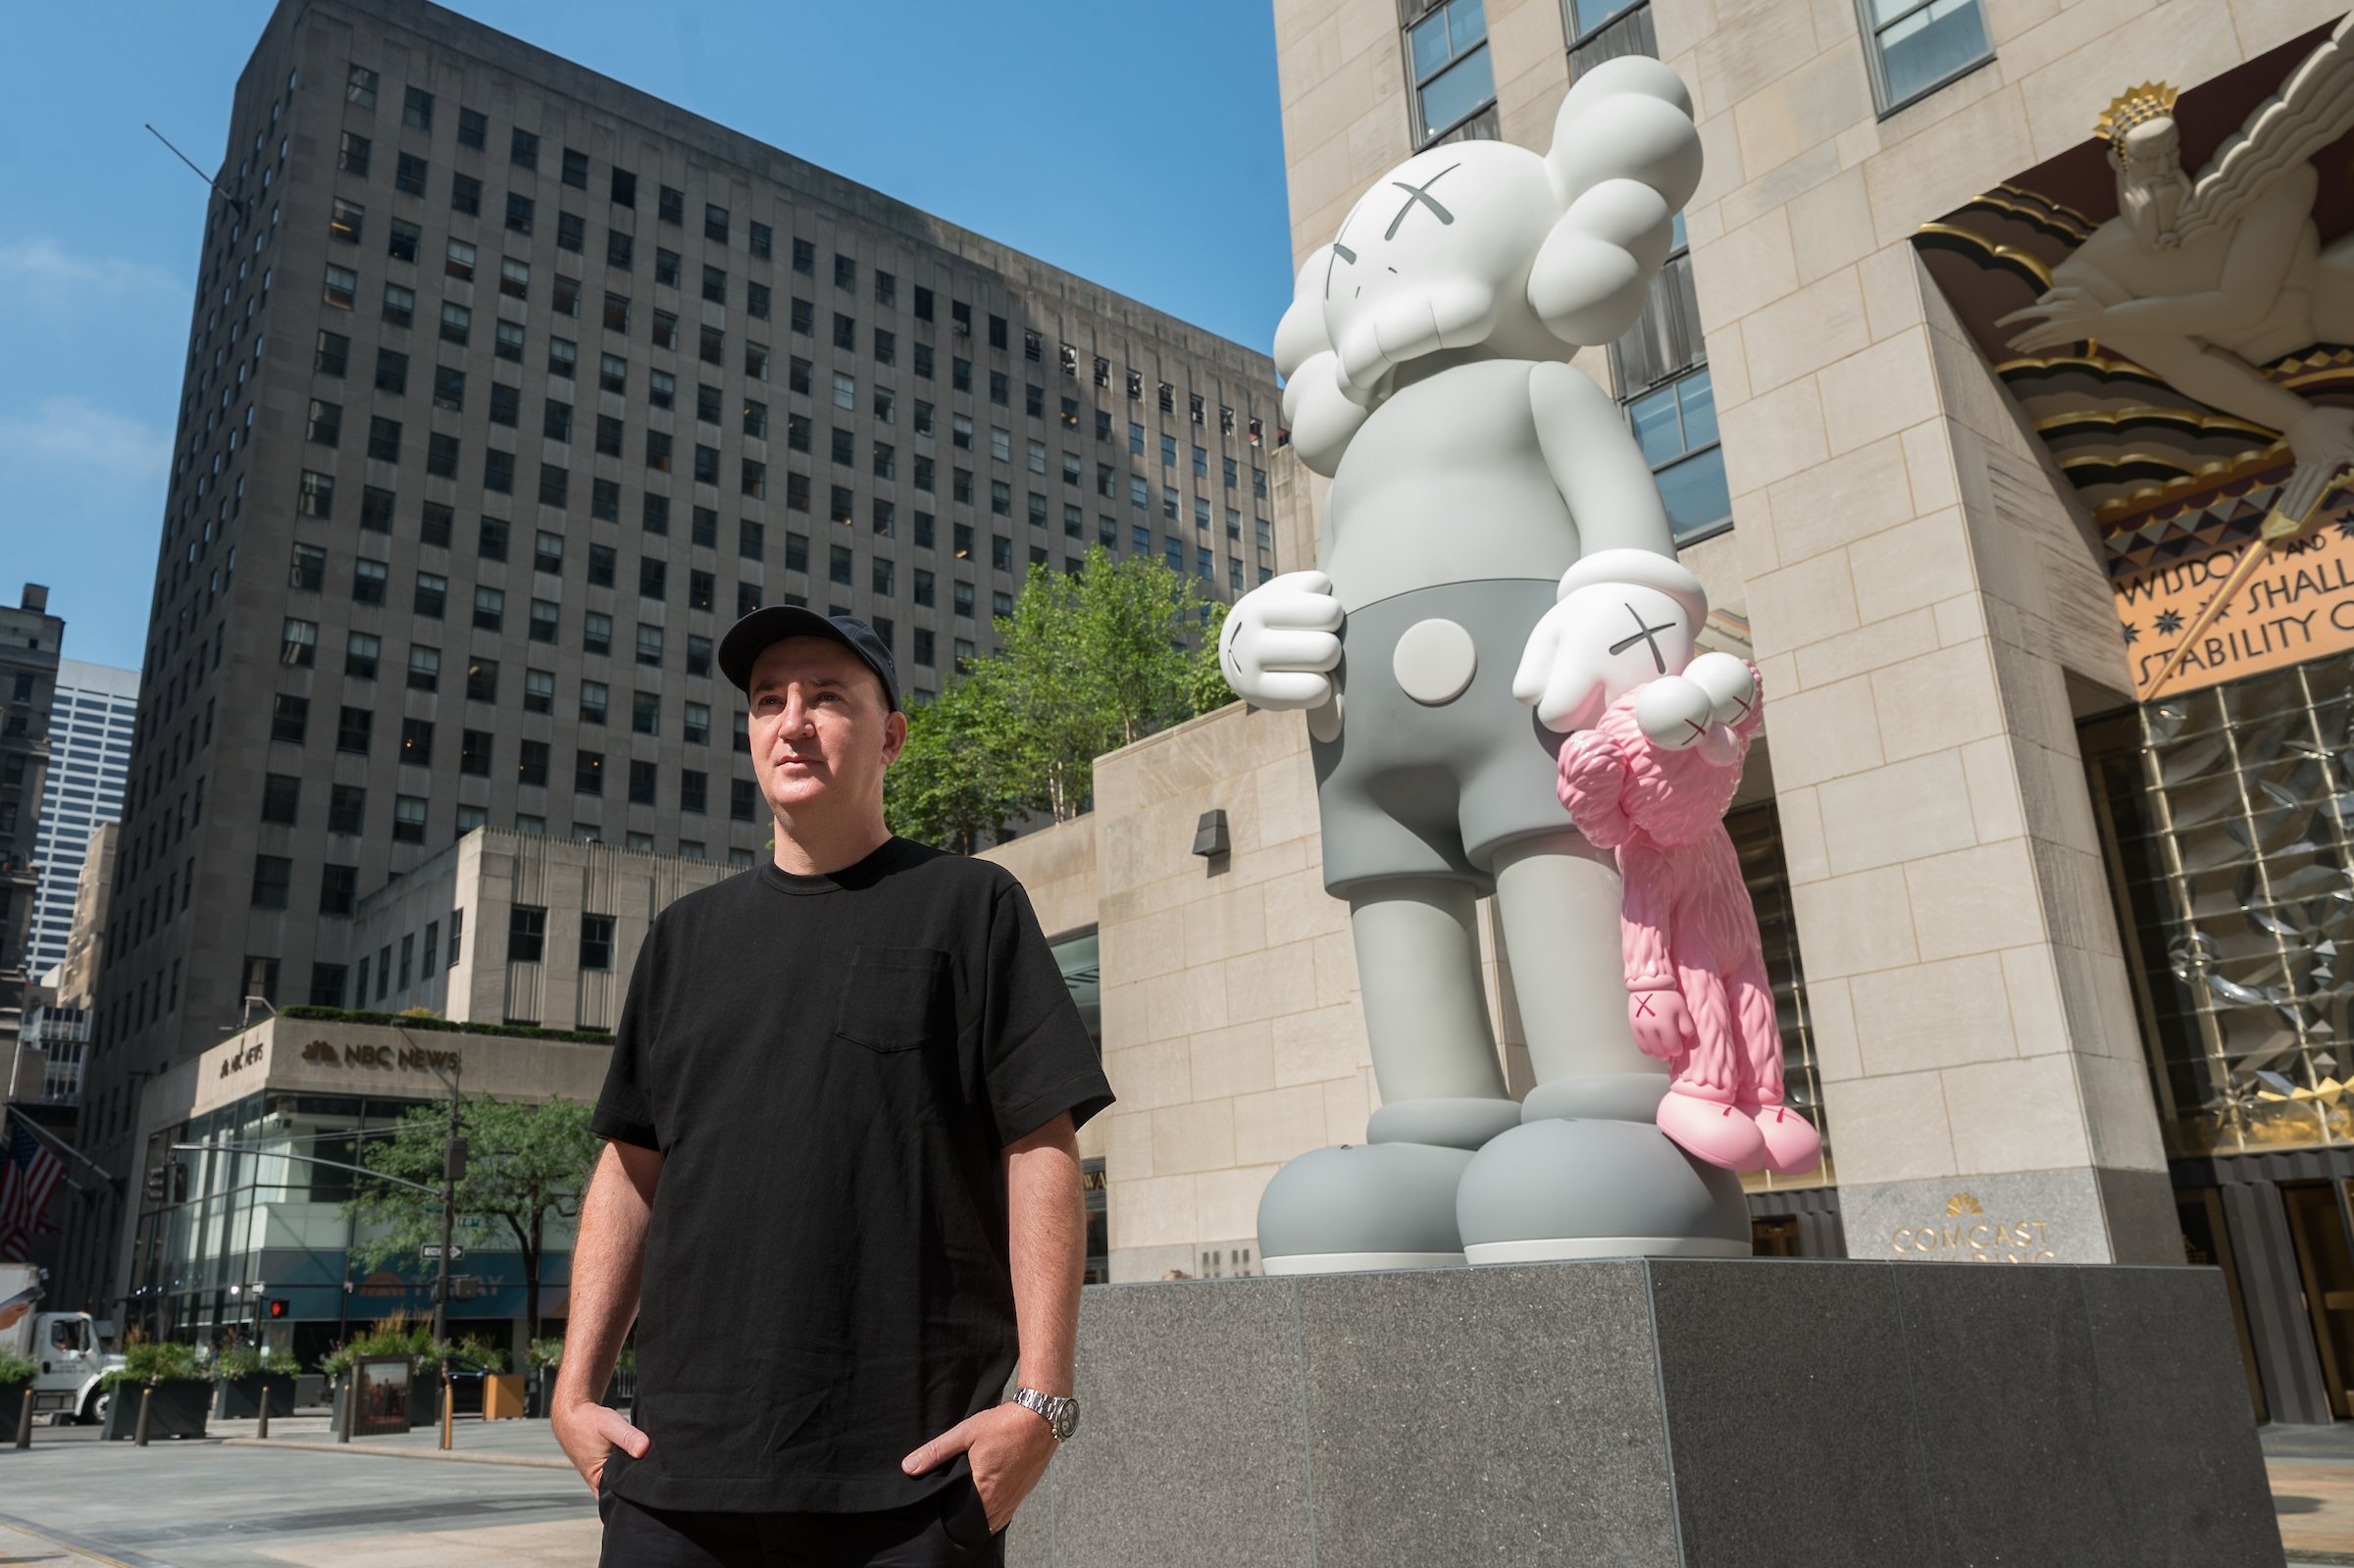 Sold at Auction: Brian Donnelly, KAWS Supreme Louis Vuitton Stormtrooper